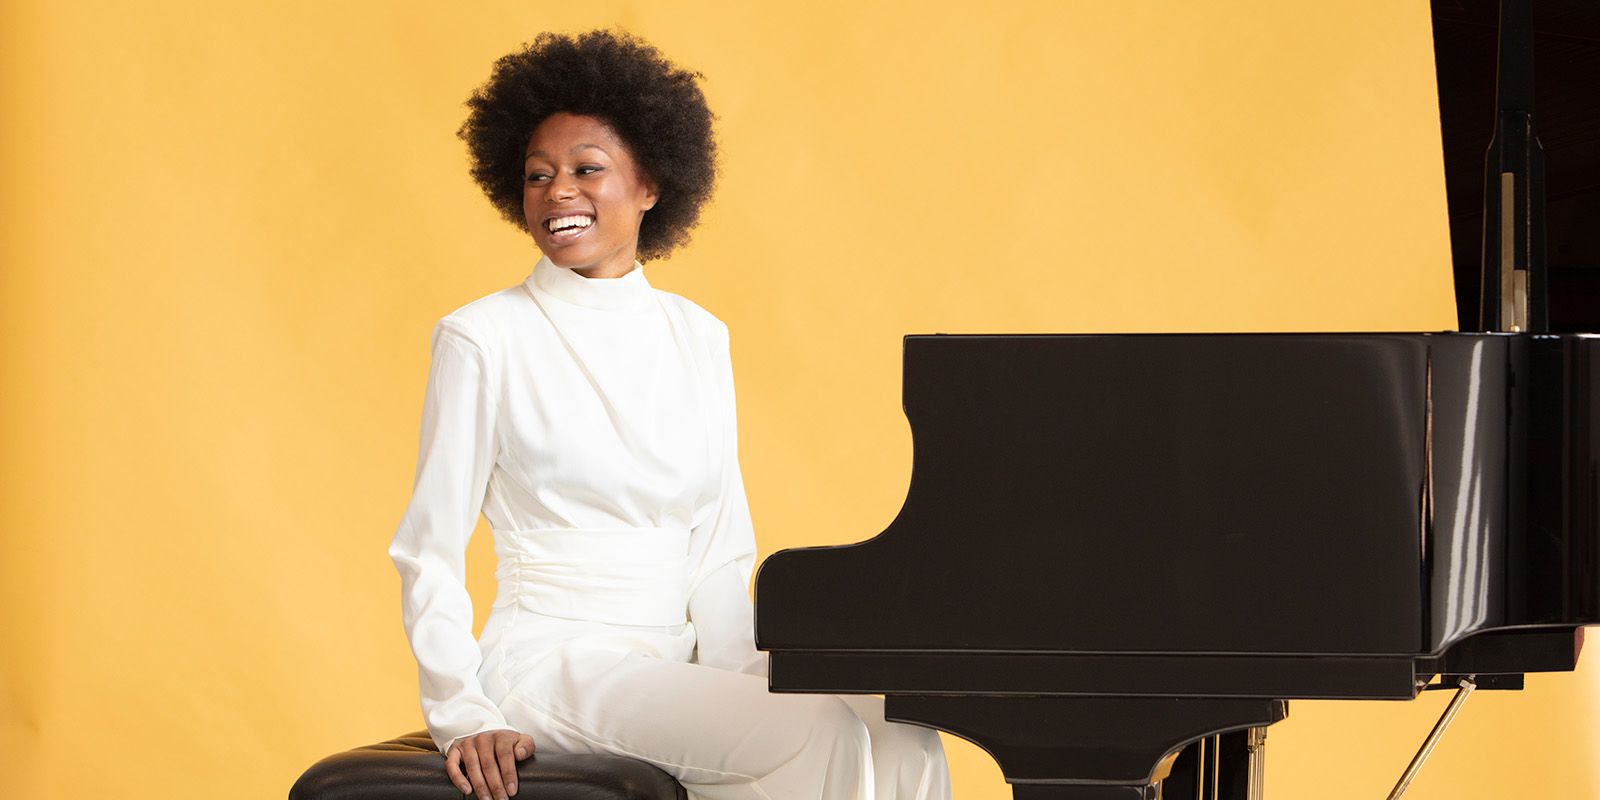 A woman in a white suit sits at a black piano in front of a bright yellow wall.